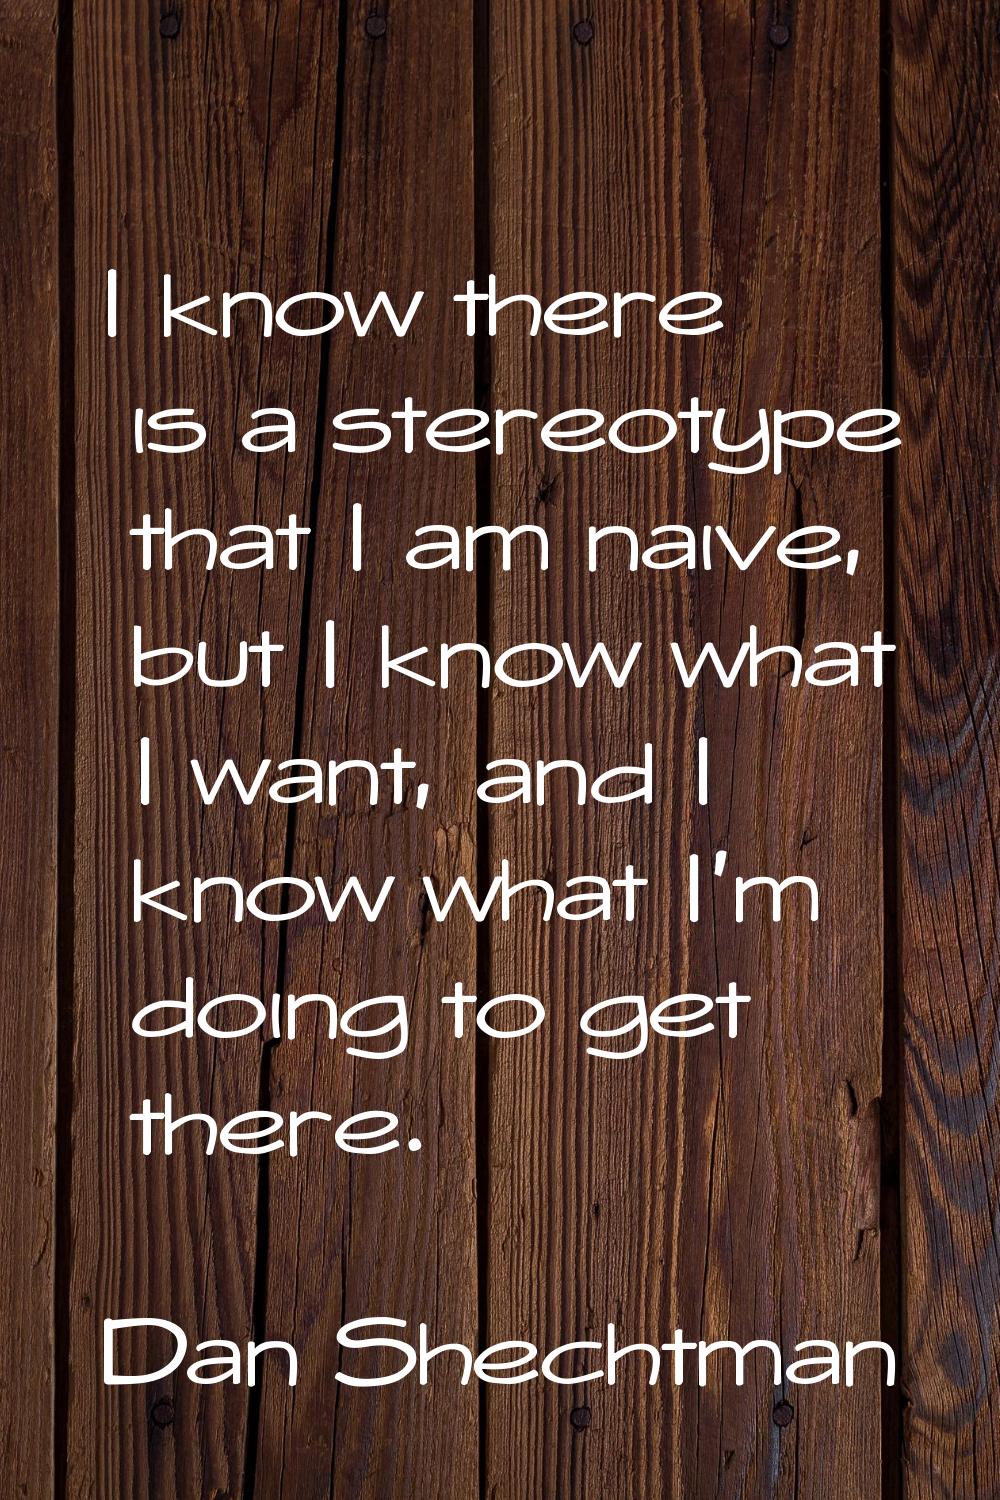 I know there is a stereotype that I am naive, but I know what I want, and I know what I'm doing to 